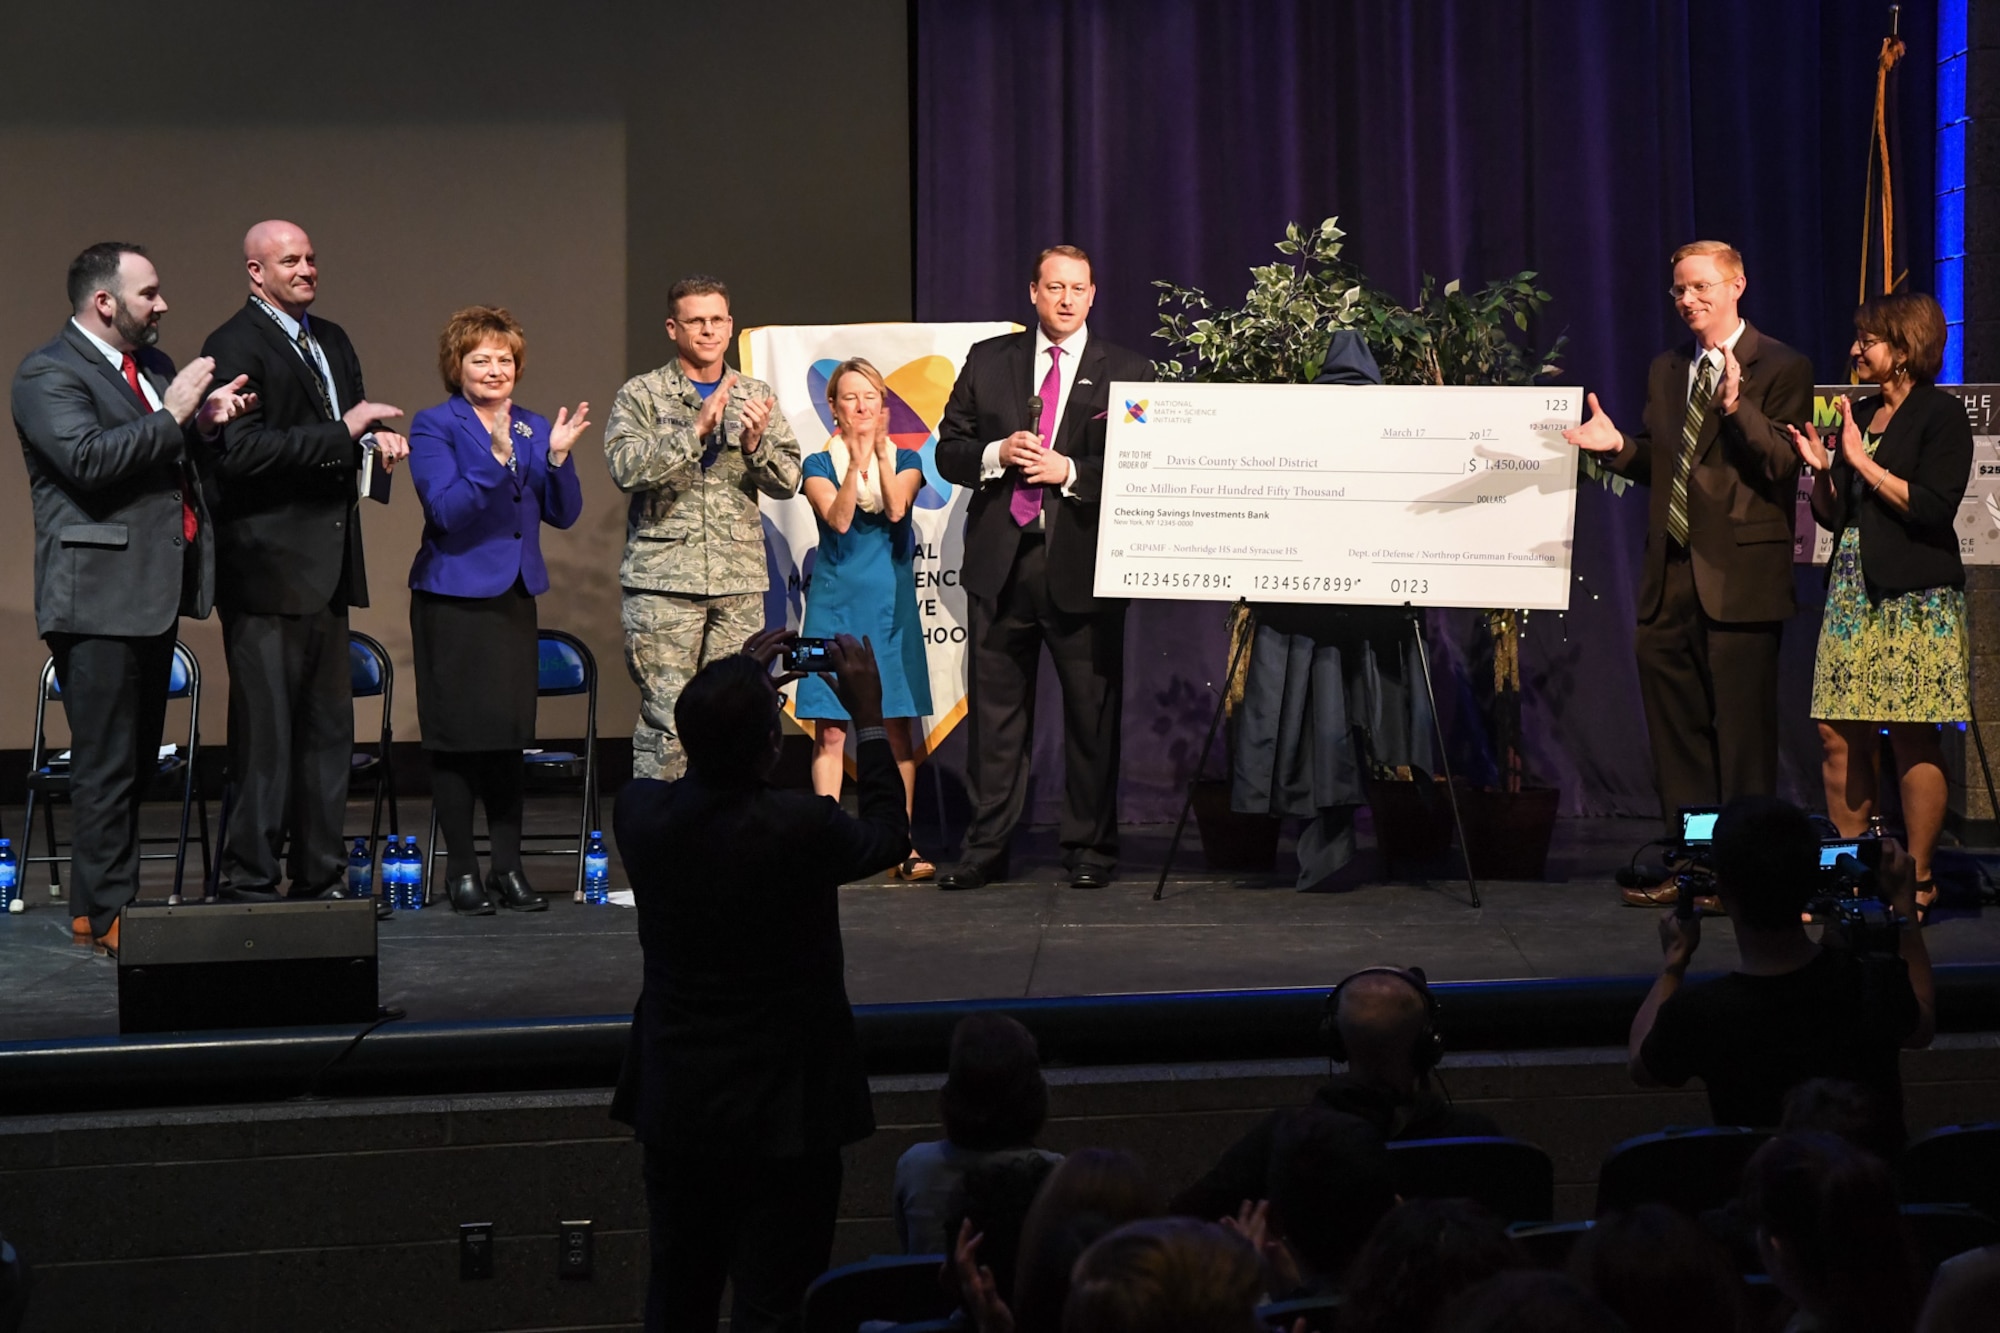 Officials from Hill Air Force Base, the Northrup Grumman Foundation, and the National Math + Science Initiative applaud after presenting multiple checks totaling $1.7 million for STEM education in the Davis School District during an event held at Syracuse High School, Utah, March 17, 2017. The majority of the investment will fund participation in the NMSI College Readiness Program at Northridge and Syracuse High Schools. The Department of Defense contributed $1.2 million, Northrup Grumman donated $250,000 and Hill AFB invested an additional $250,000 in partnership with the State of Utah STEM Action Center. (U.S. Air Force photo/ R. Nial Bradshaw)